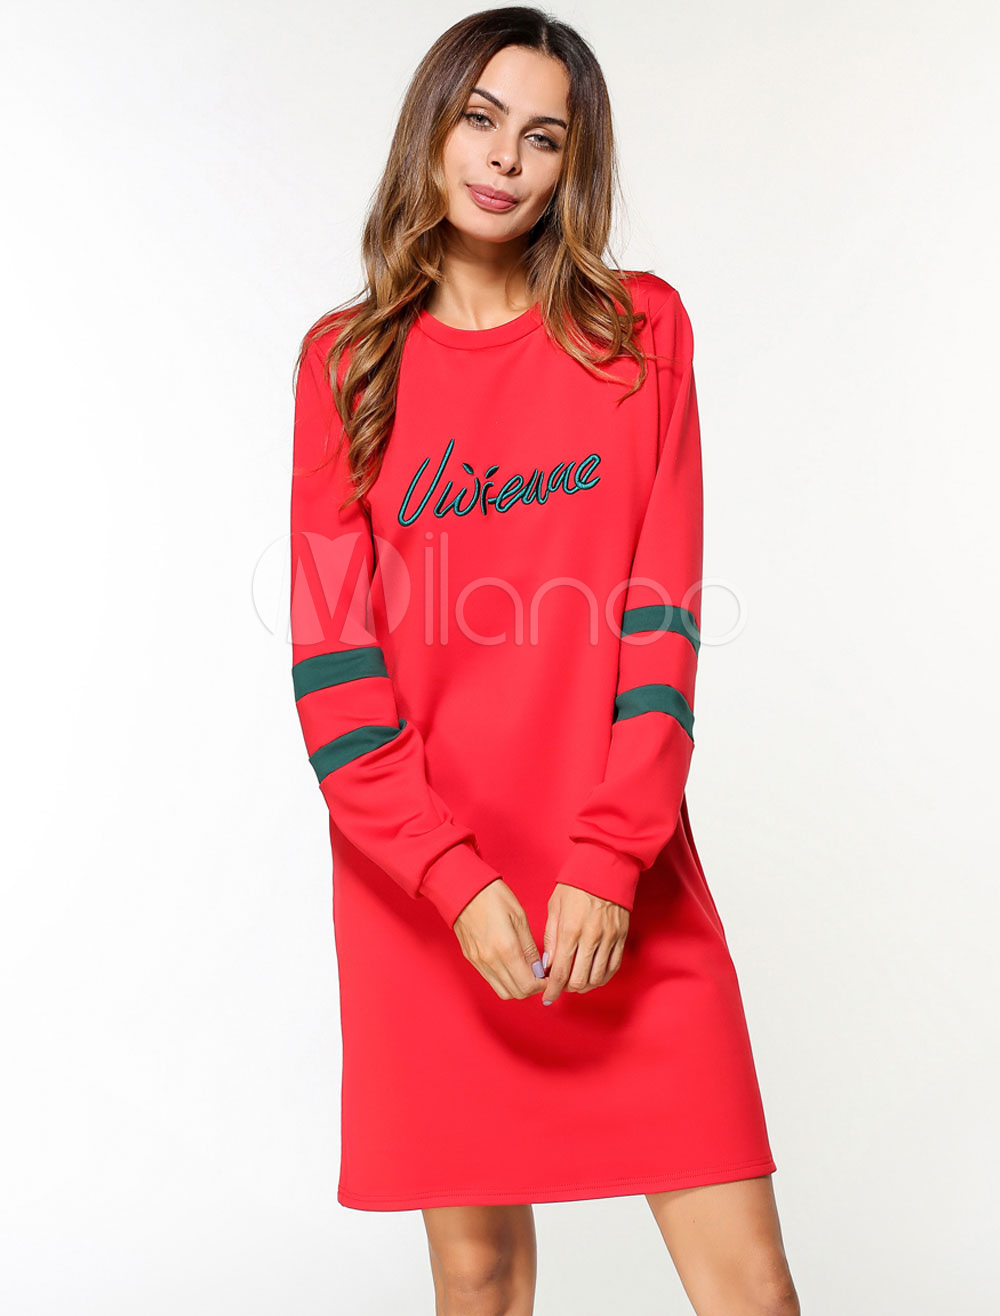 Red Shift Dress Embroidered Cotton Women Dress Long Sleeve (Women\\'s Clothing Shift Dresses) photo